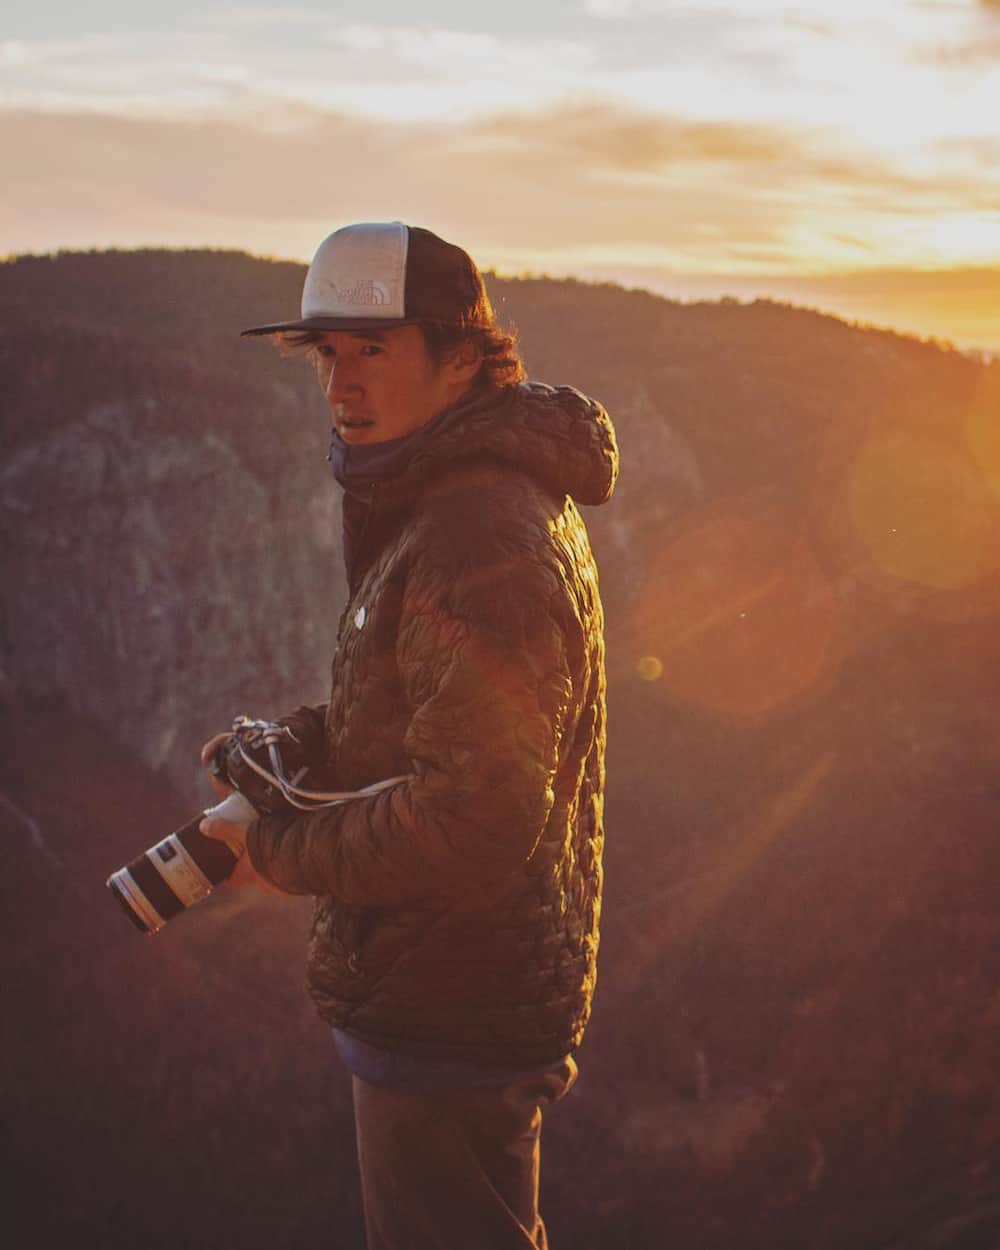 Who is Jimmy Chin married to?